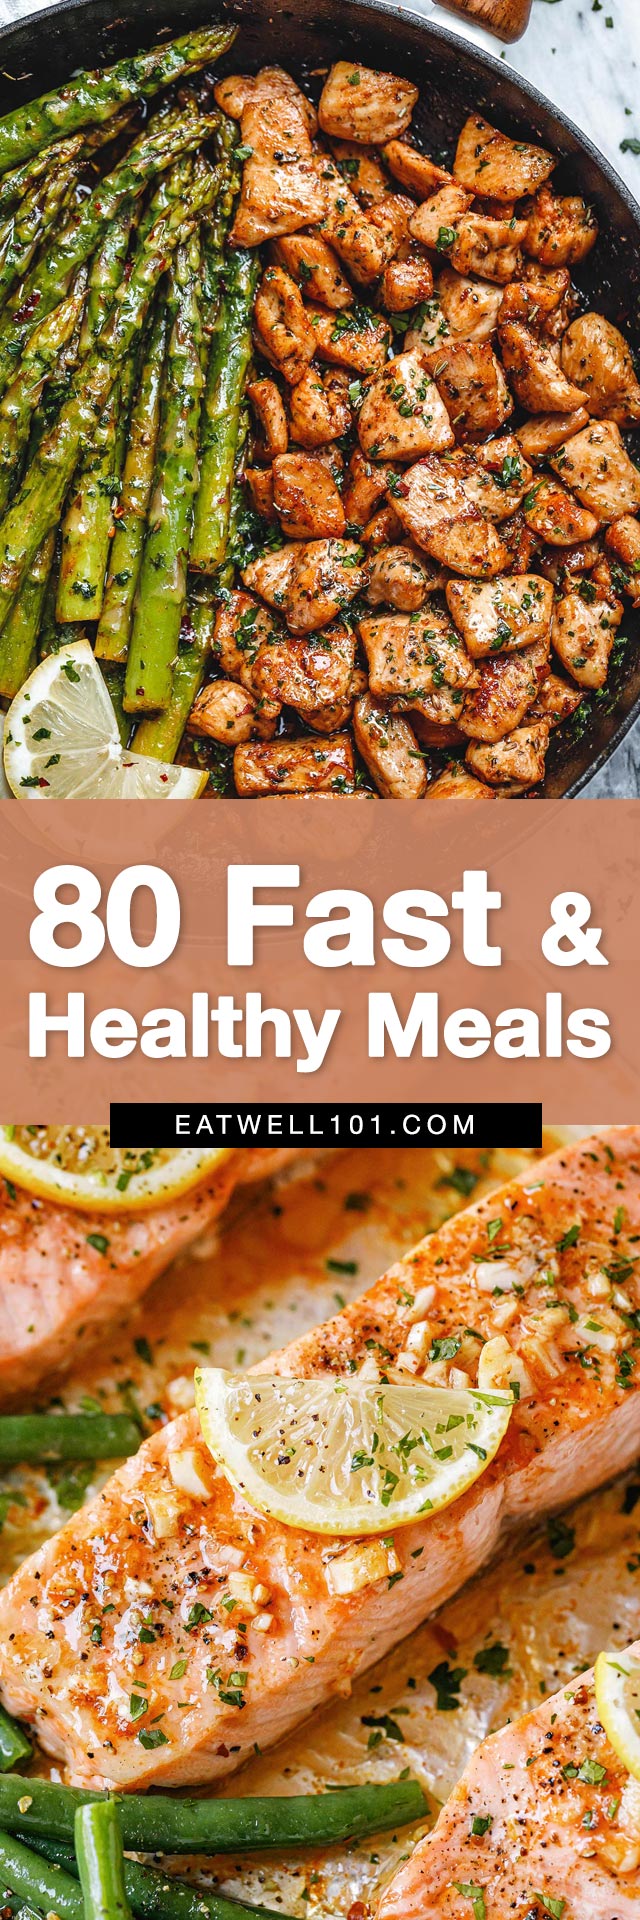 Fast and Healthy Recipes - #fast #quick #healthy #meals #recipes #eatwell101 - These fast and easy recipes are perfect for your weeknight dinners. Enjoy! 